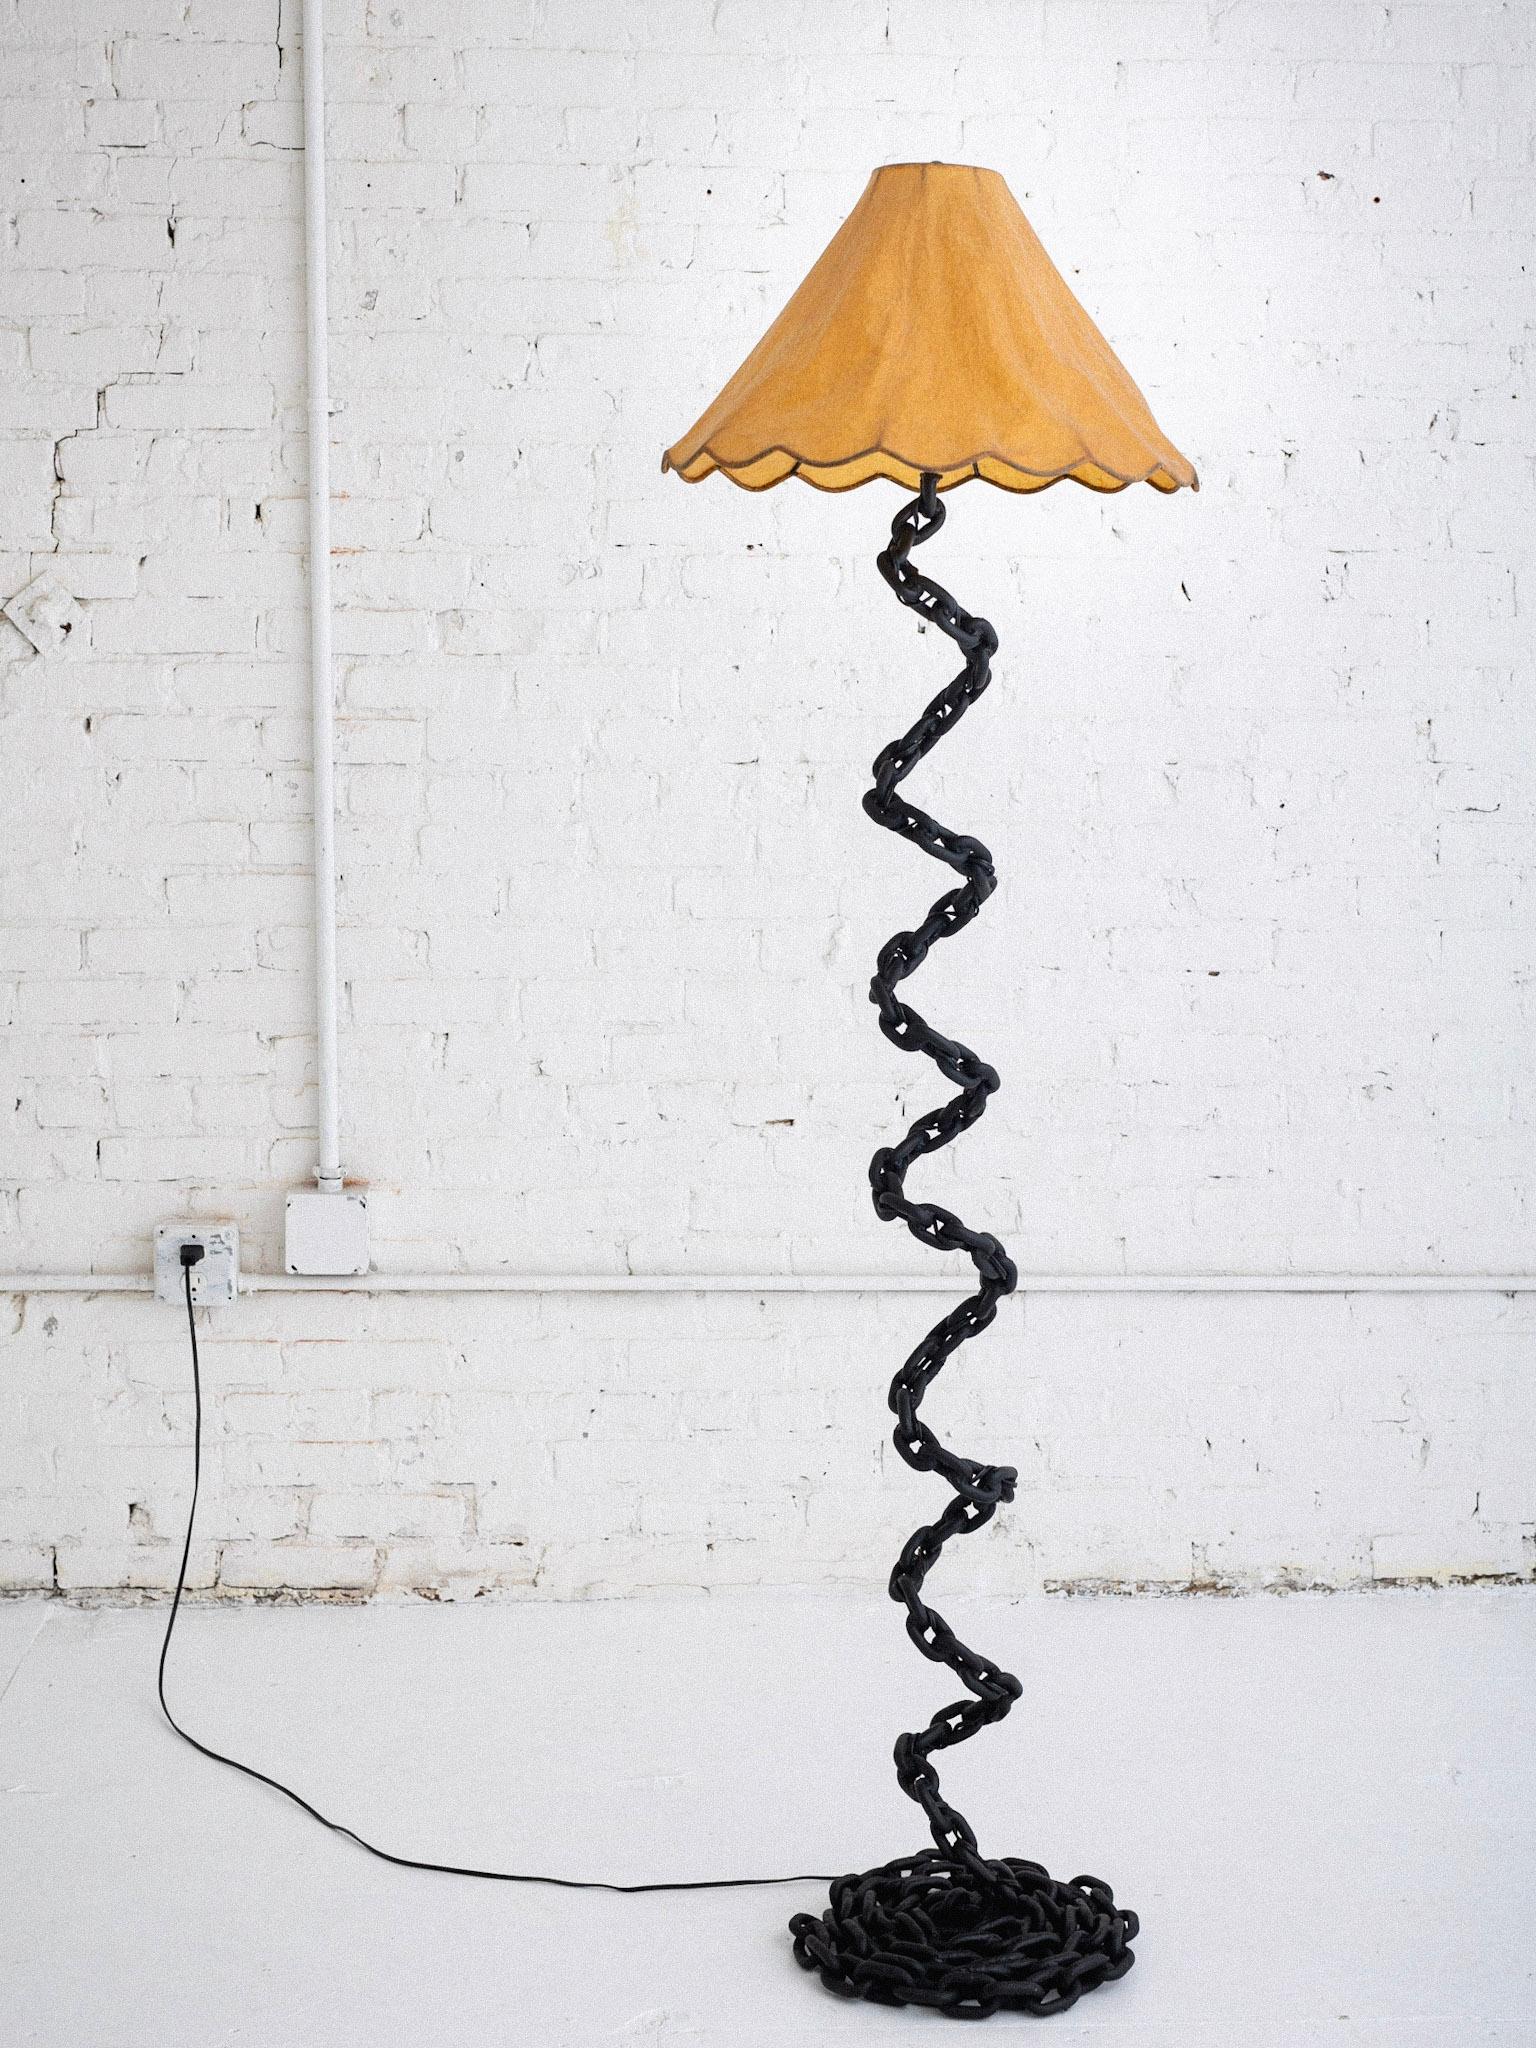 A studio made chain link floor lamp. Hand welded links spiral to create a twisted silhouette on a coiled chain base. Painted black. One available. Shade not included. Measurements are from the base to the top of the socket. The shade harp adds an